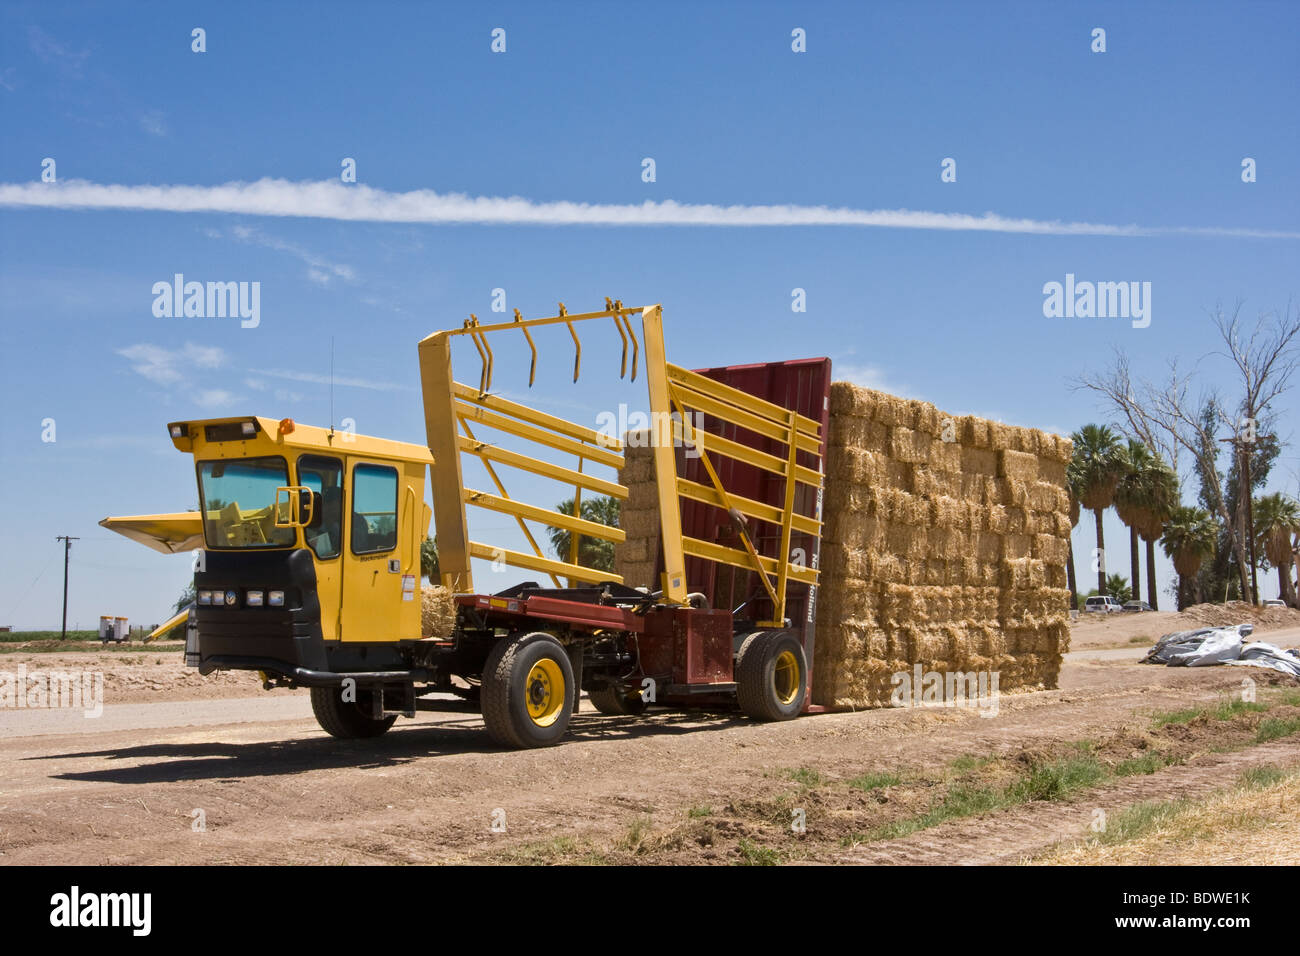 A field stacking machine deposits or road sides a load of wheat bales near a road located in the Imperial Valley, California Stock Photo